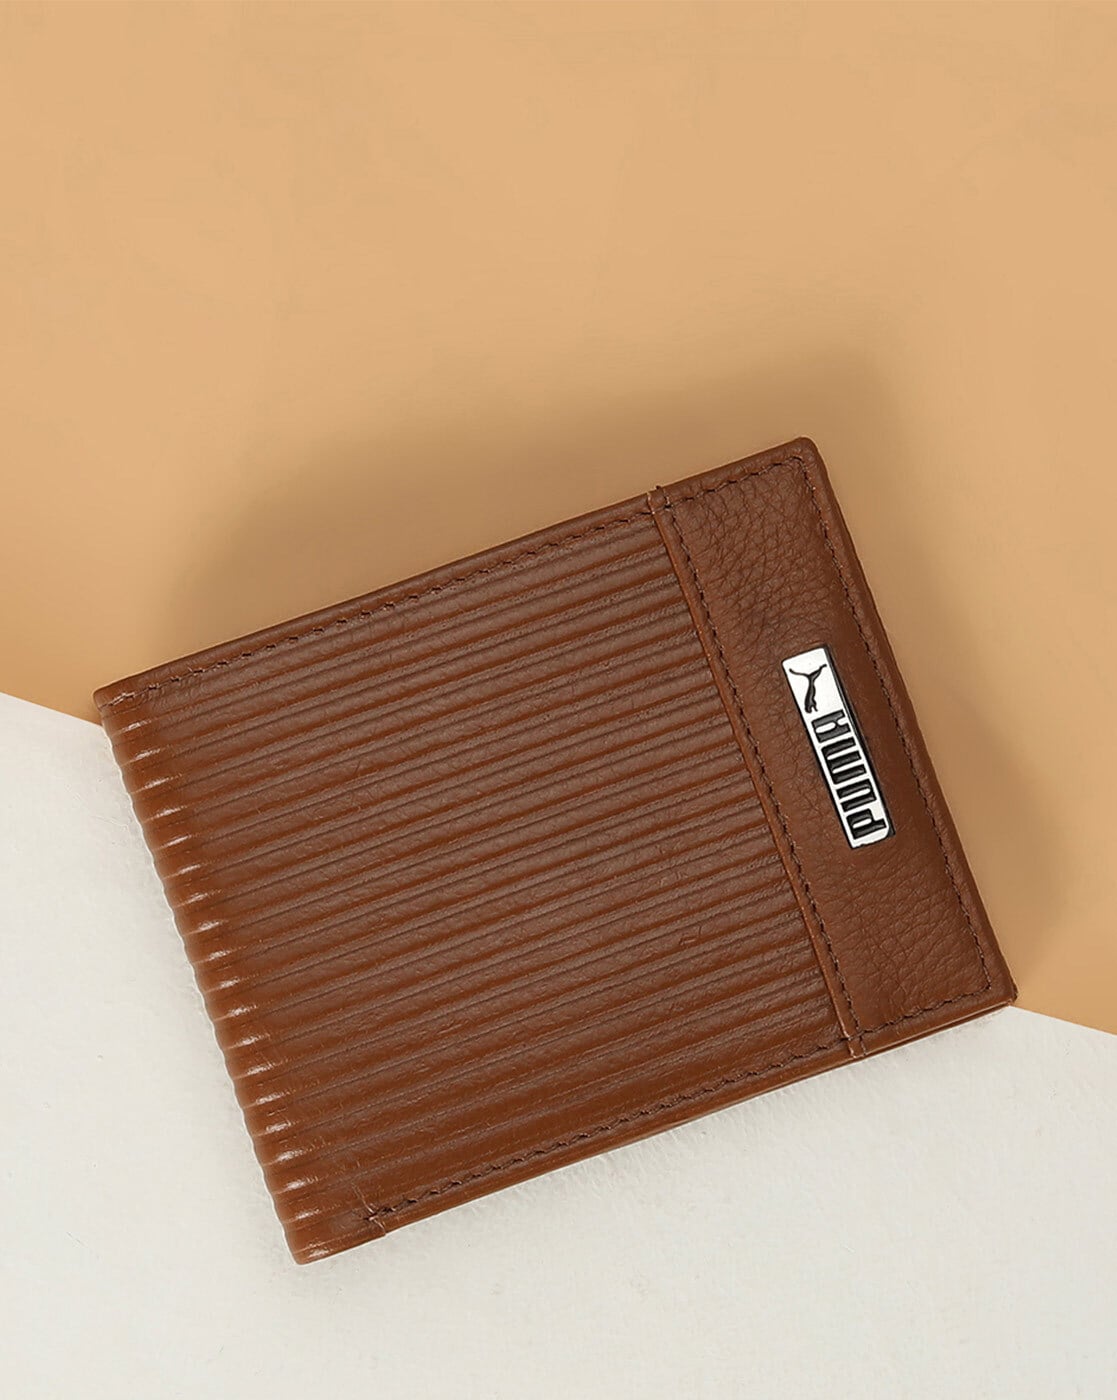 Buy Puma Unisex-Adult Leather Stripe Wallet, Chocolate (9105502) at  Amazon.in